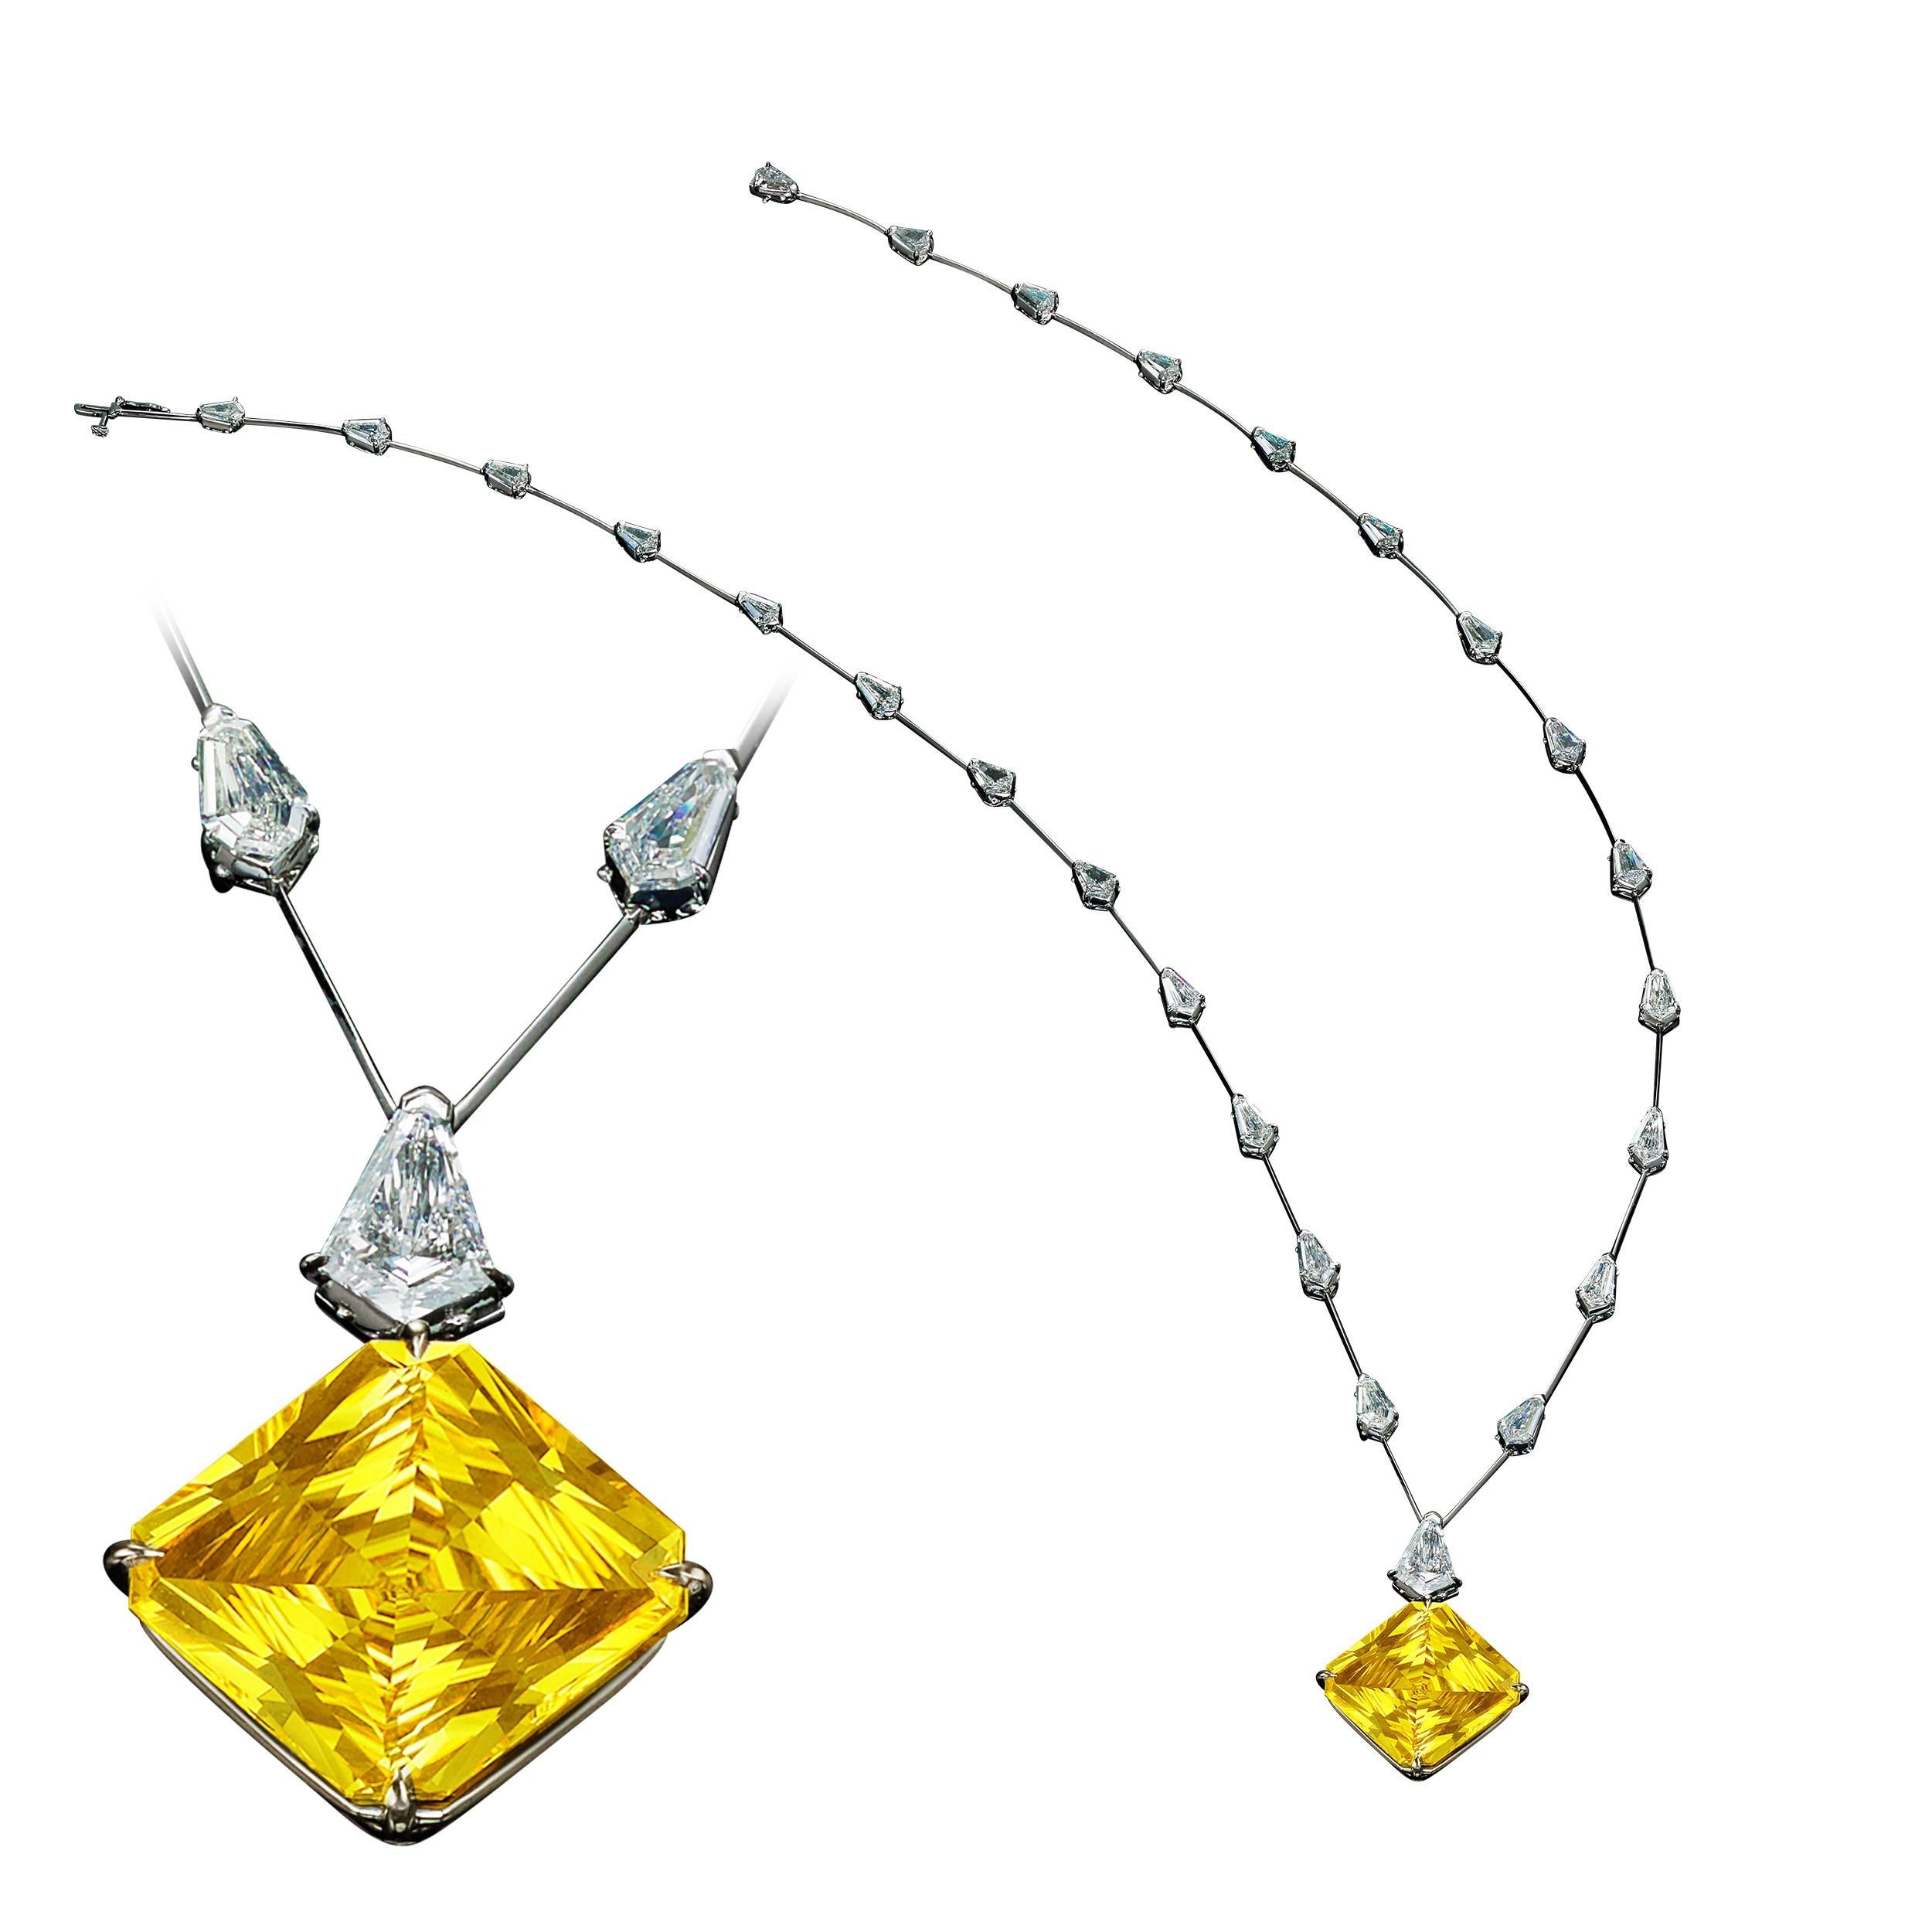 Custom Made 26.86ct Gem Quality No Heat Vivid Yellow Ceylon Emerald Cut Sapphire Necklace.  Set with an extremely unique layout of 9.09ct Fine Quality Kite Diamonds.  Beautifully laid out sapphire, vibrant, super clean stone, golden yellow